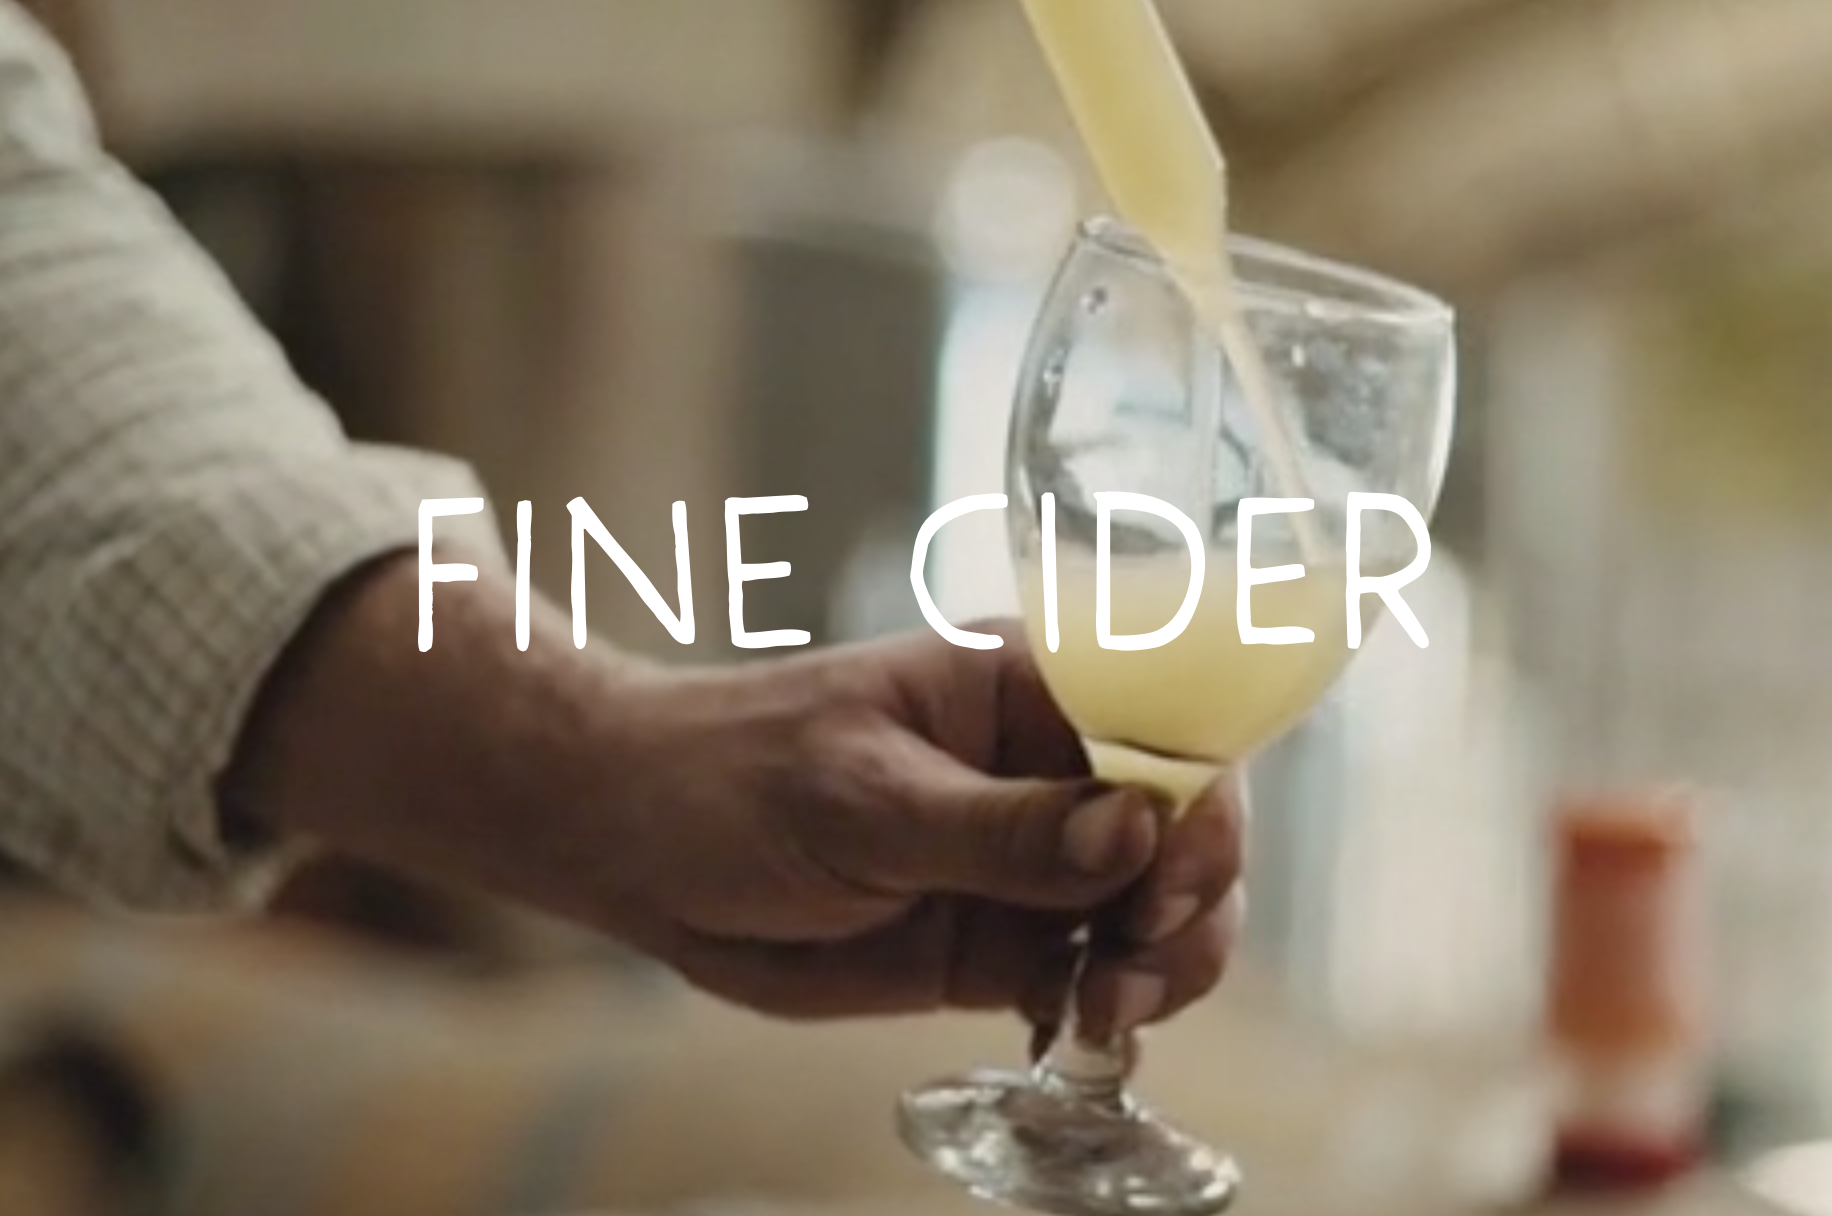 The Fine Cider Company's Pommelier Club offers up delicious fresh ciders from just £44 per month subscription